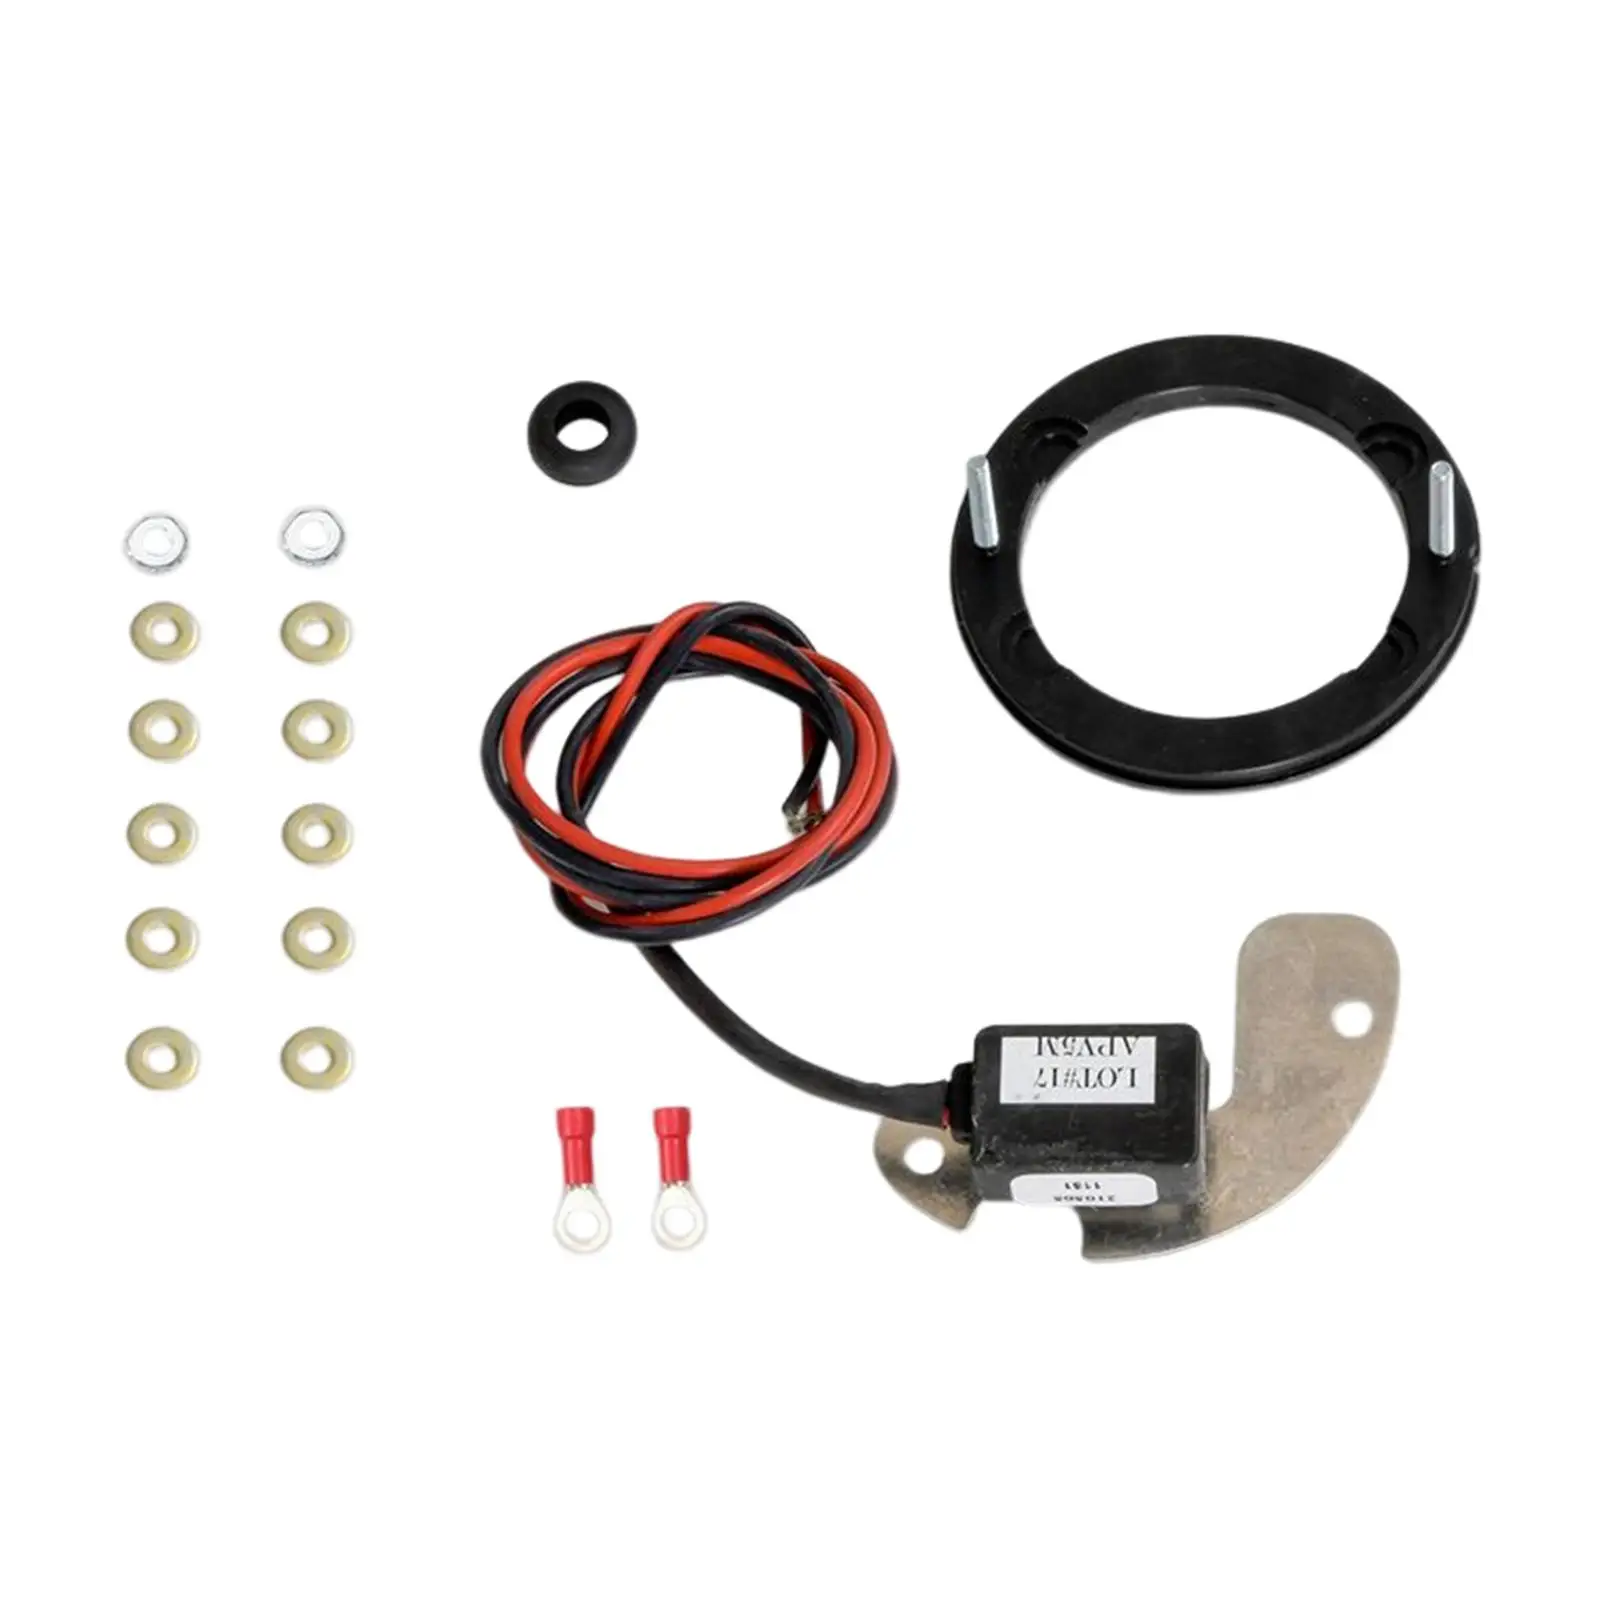 Ignition Module Conversion Set for Delco 8 Cylinder 1956-1974 Upgrade